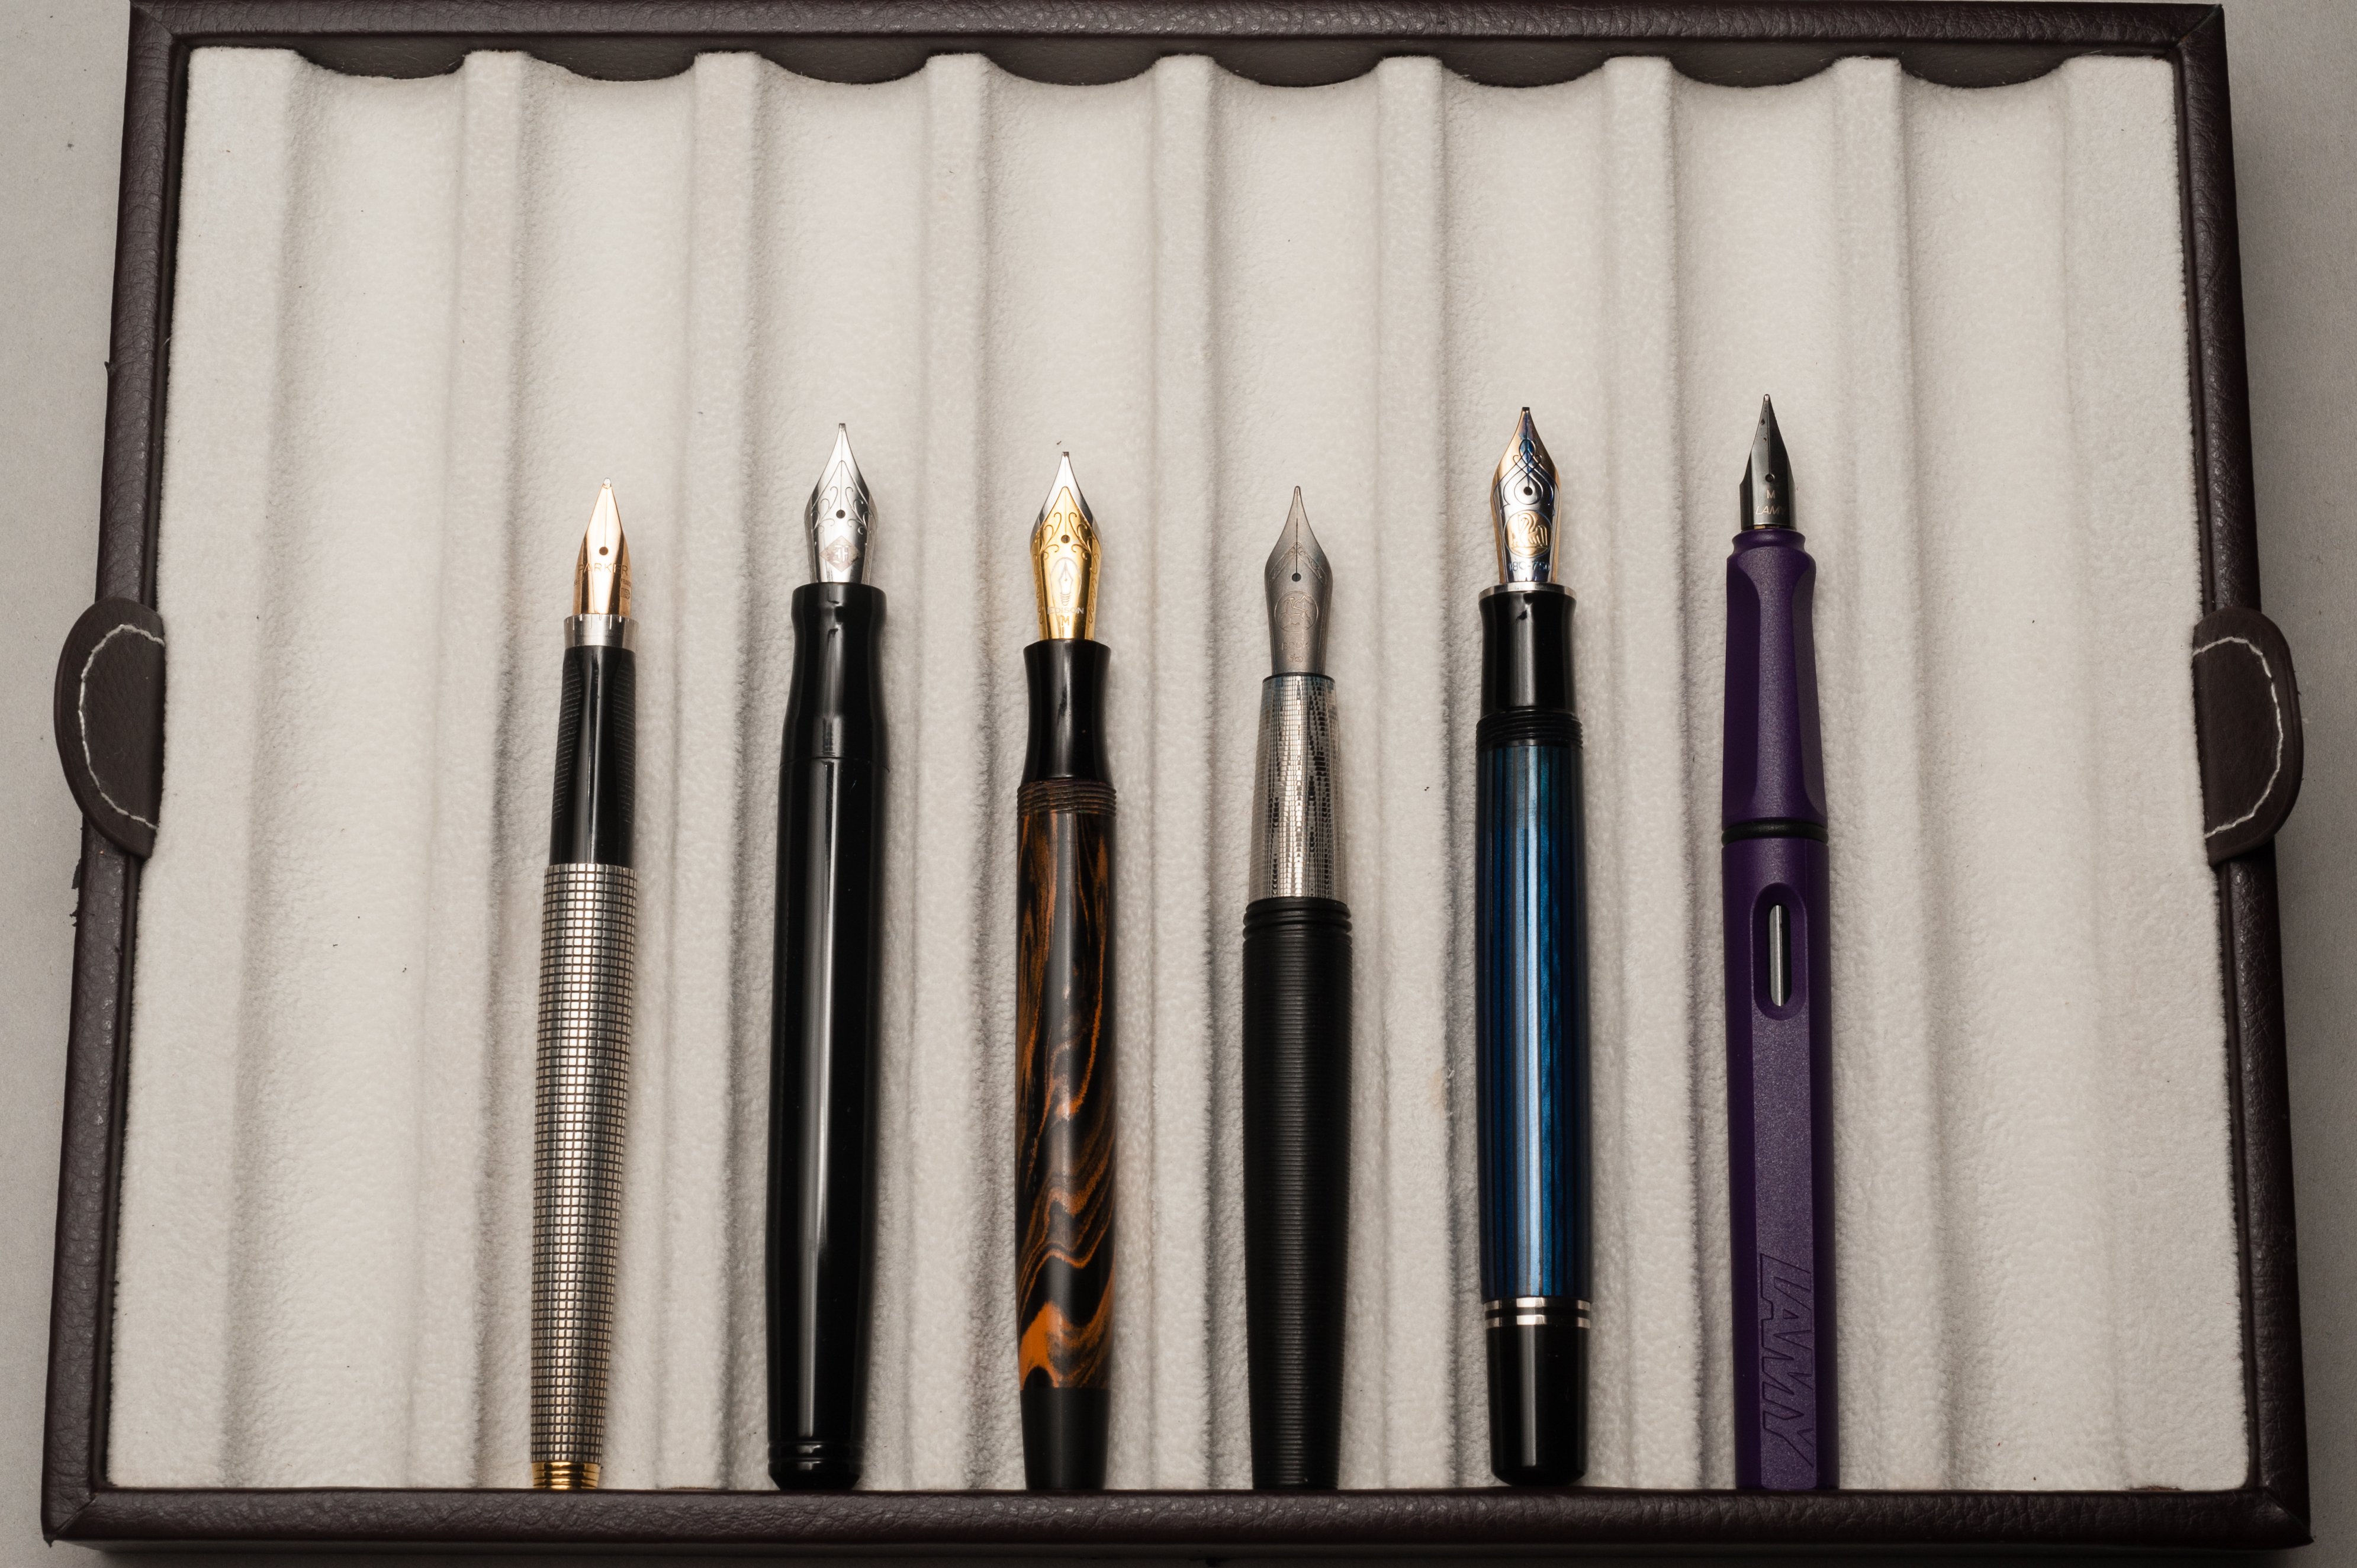 Unposted pens from left to right: Parker 75, Franklin-Christoph Model 20, Edison Beaumont, Tactile Turn Gist, Pelikan M805, and Lamy Safari